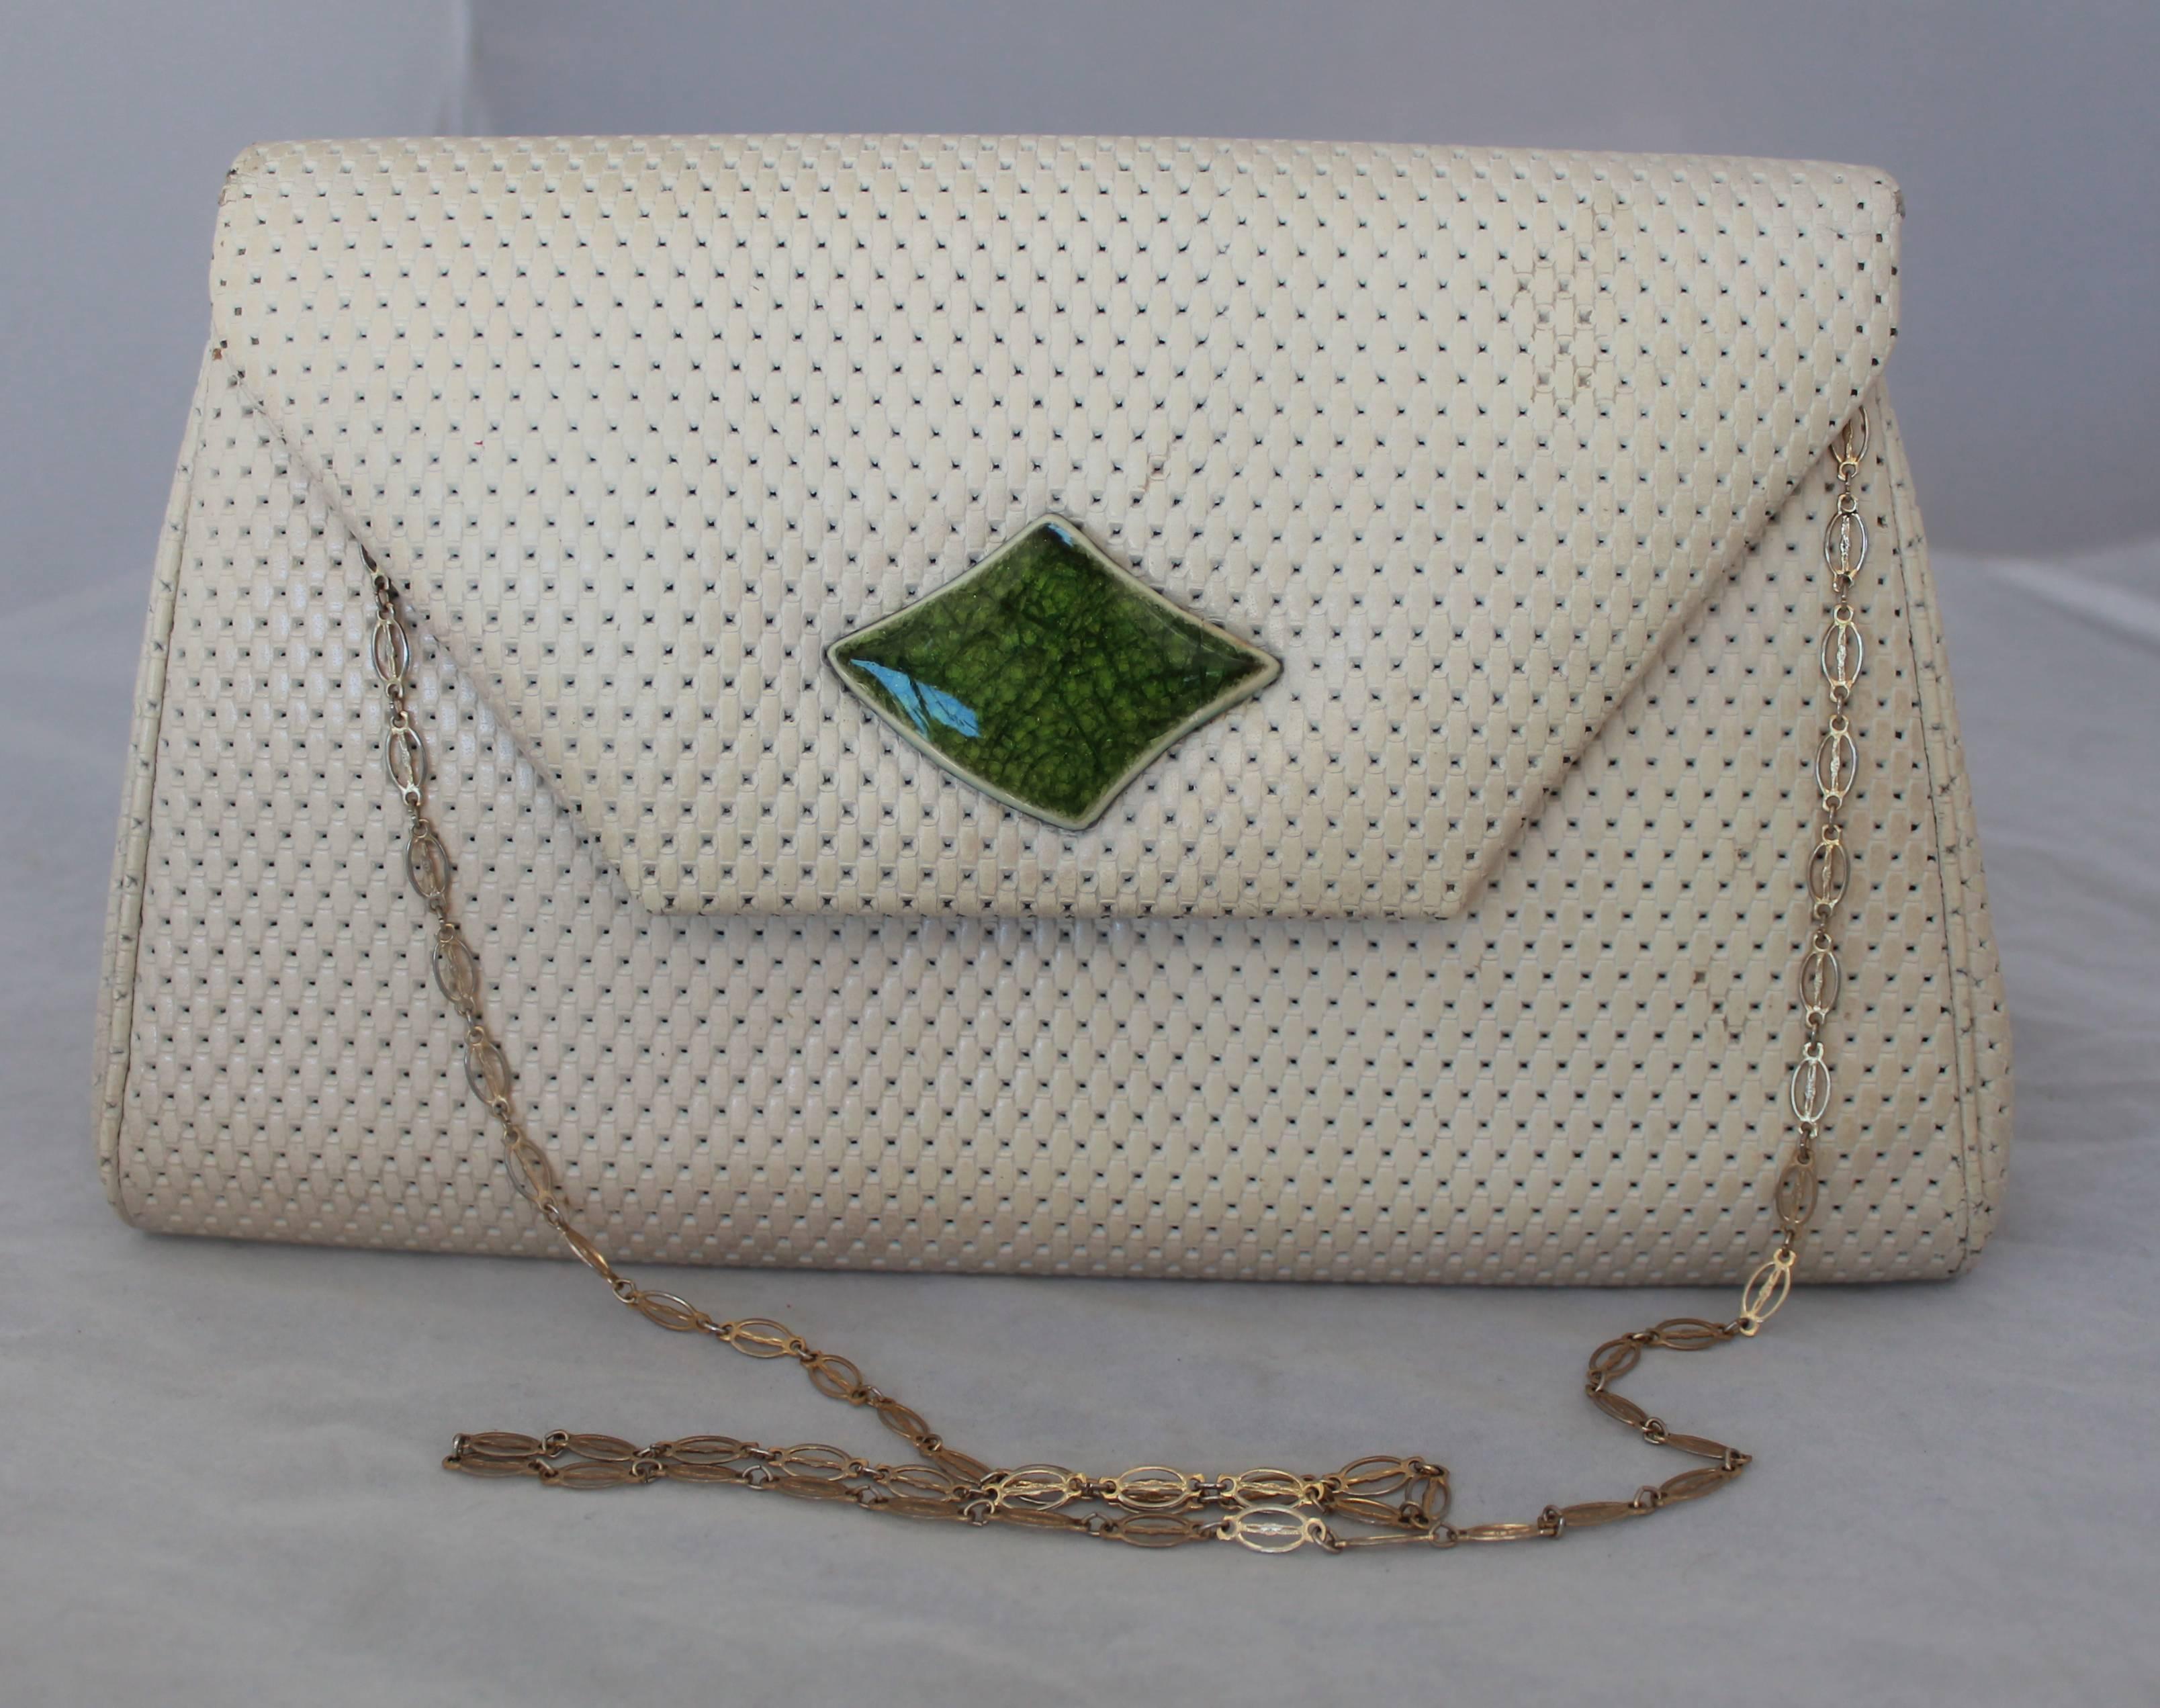 Paris Jacomo Ivory Perforated Leather Clutch with Green Stone - circa 1980's. This clutch is in good vintage condition with a couple areas having marks on the front and back (shown in images). The clutch is a fold-over style and features a tan